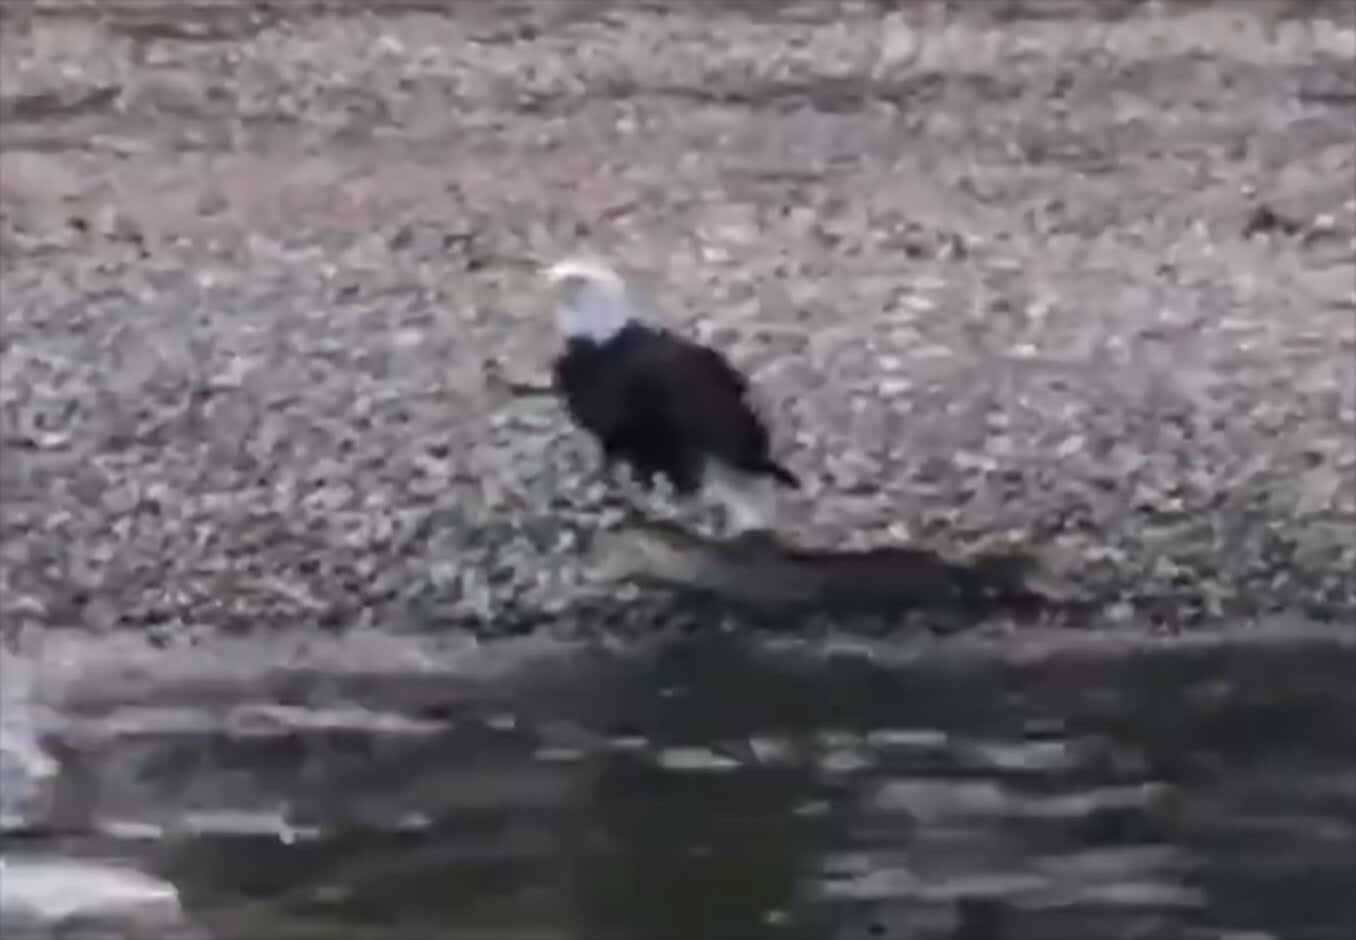 Bald eagle catches a fish too heavy to fly with so it swims it ashore. Big fish trifecta complete